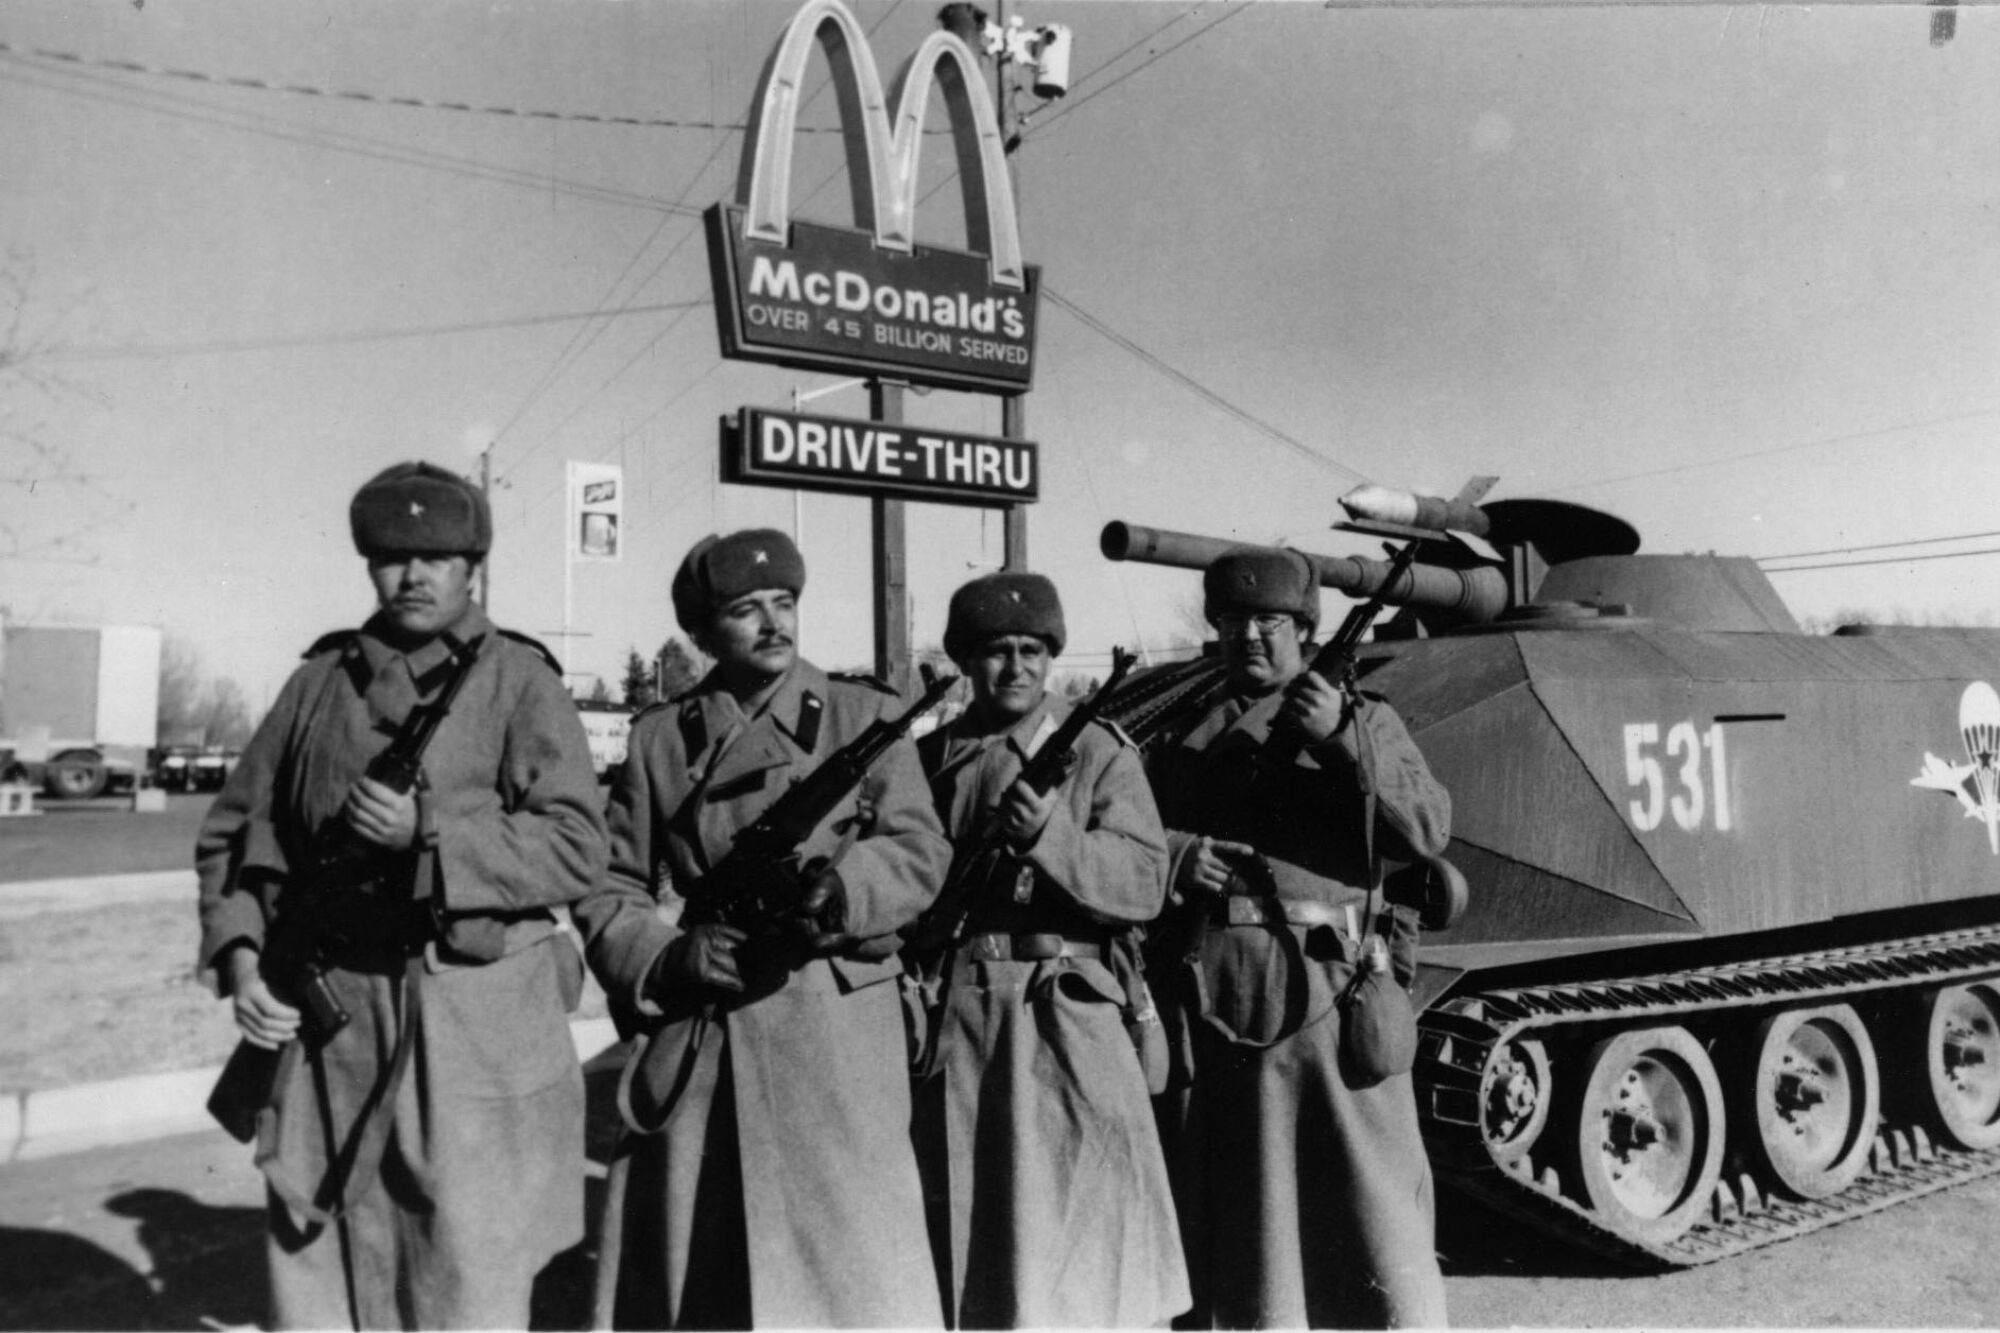 A black-and-white movie still from "Red Dawn" shows Soviet troops standing before a McDonald's.